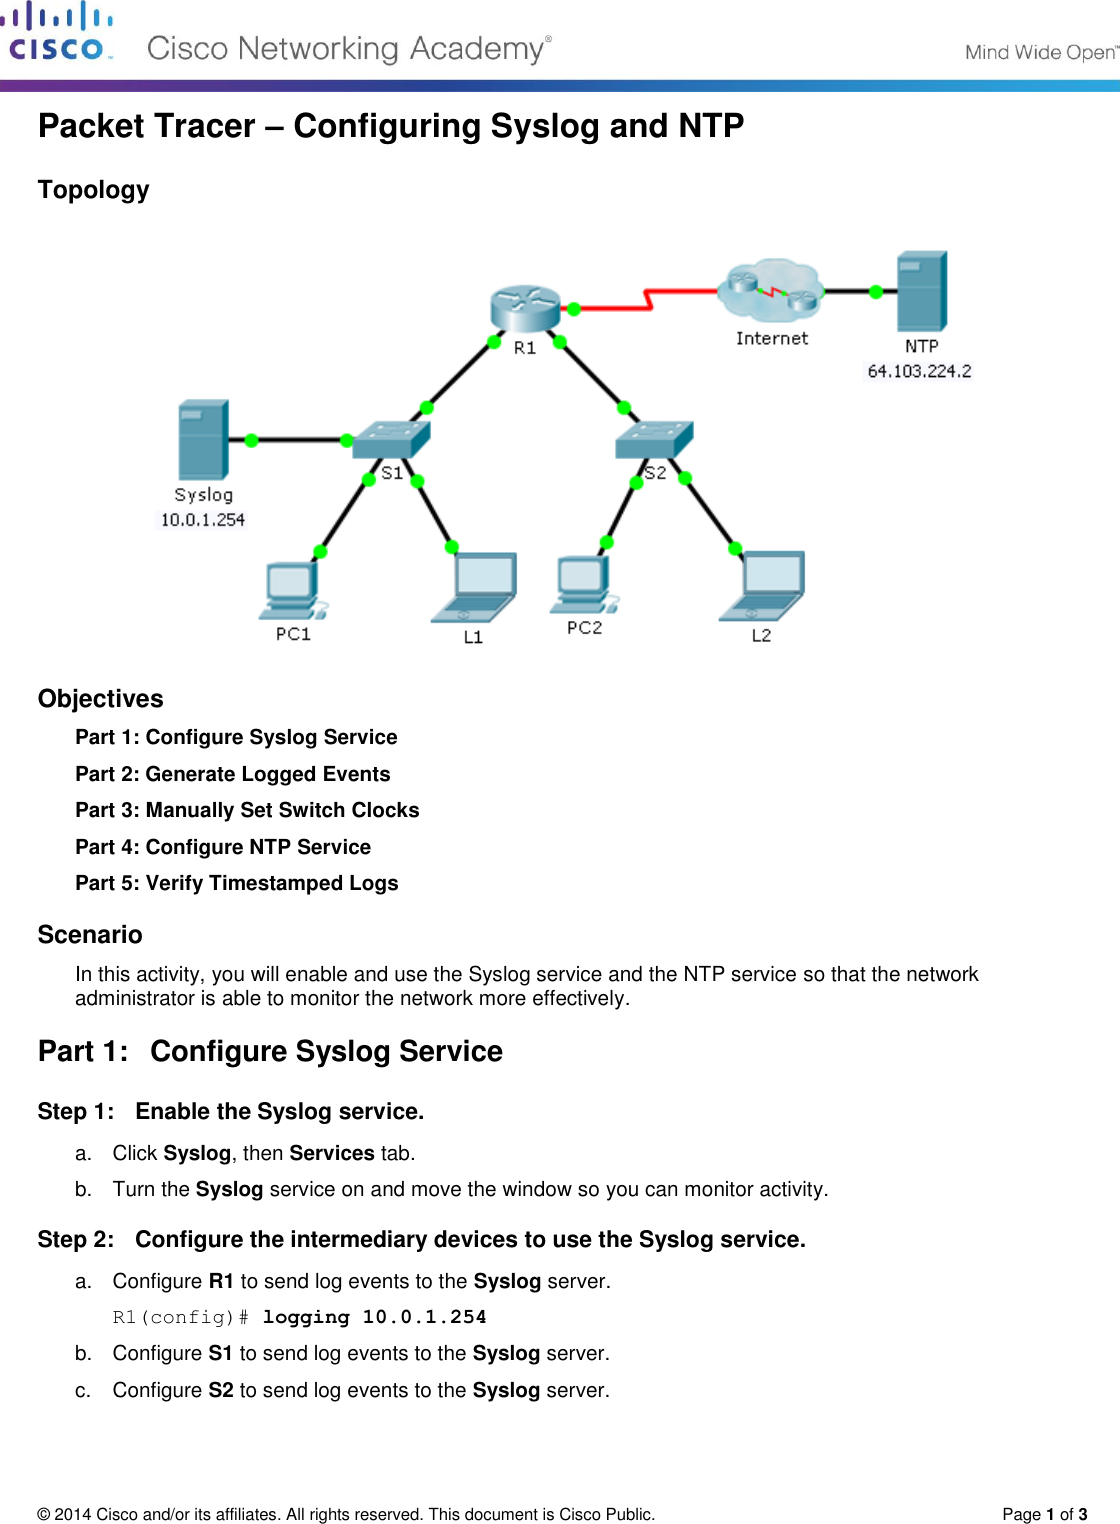 10235 Packet Tracer Configuring Syslog And Ntp Instructions